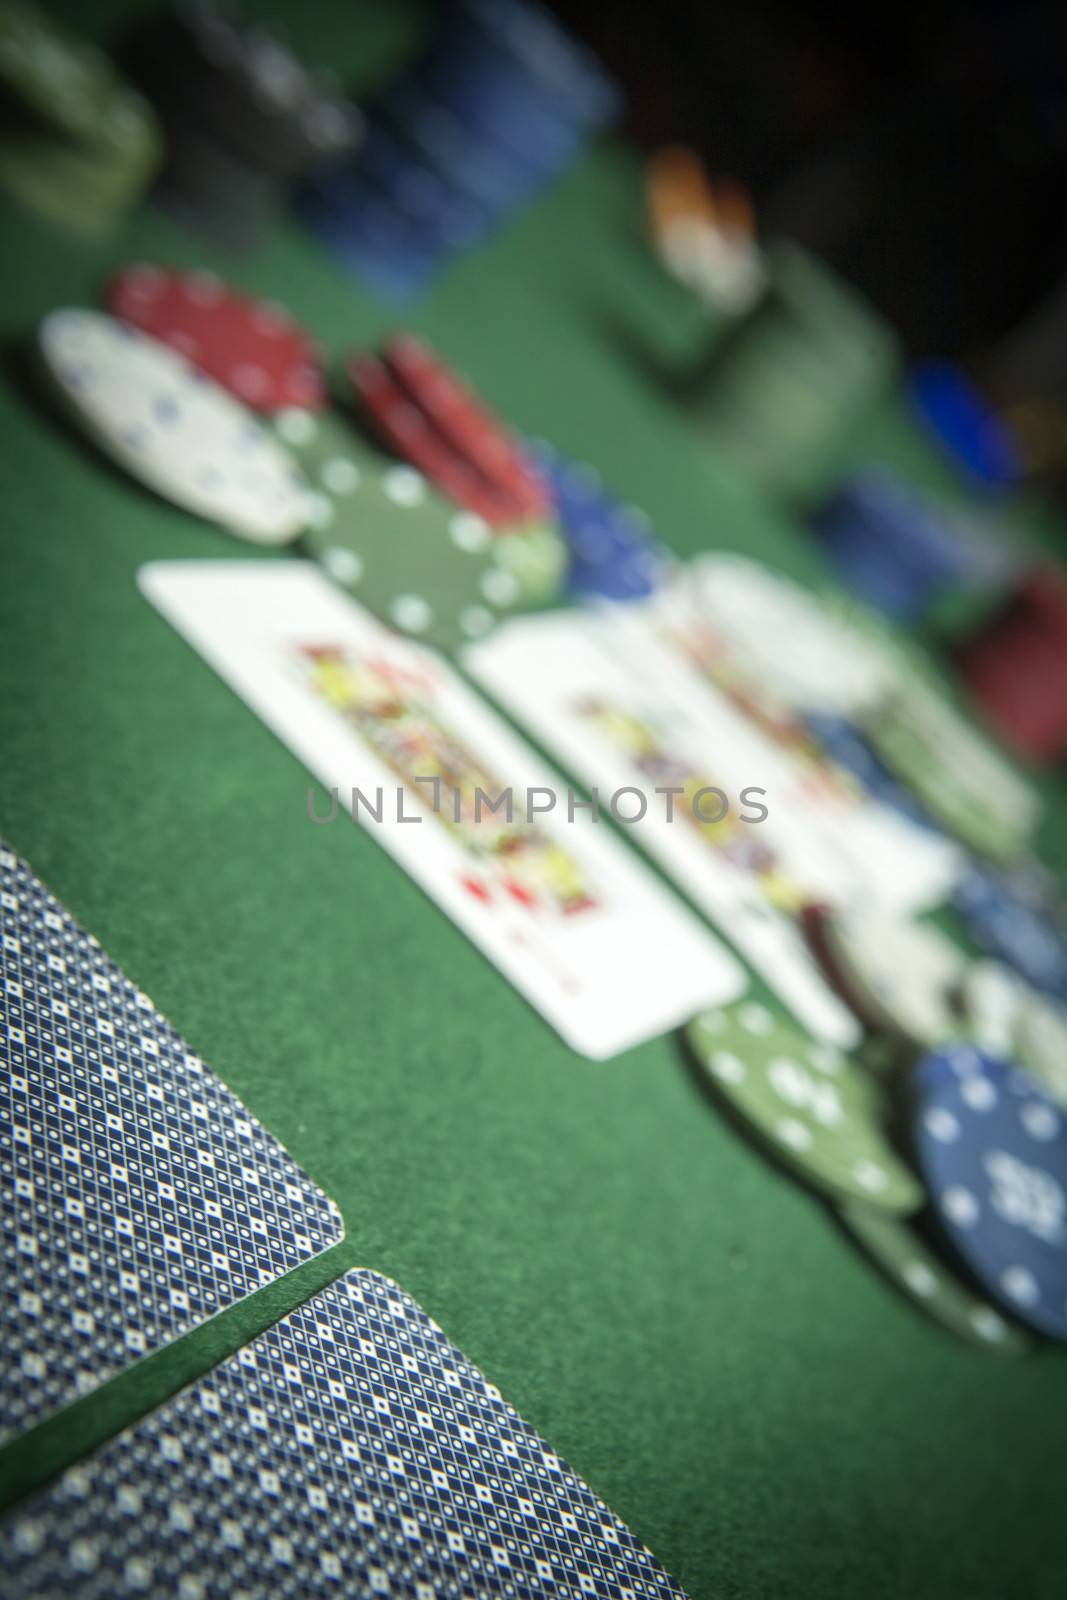 cards poker deck English, poker chips stack on green table  by digicomphoto